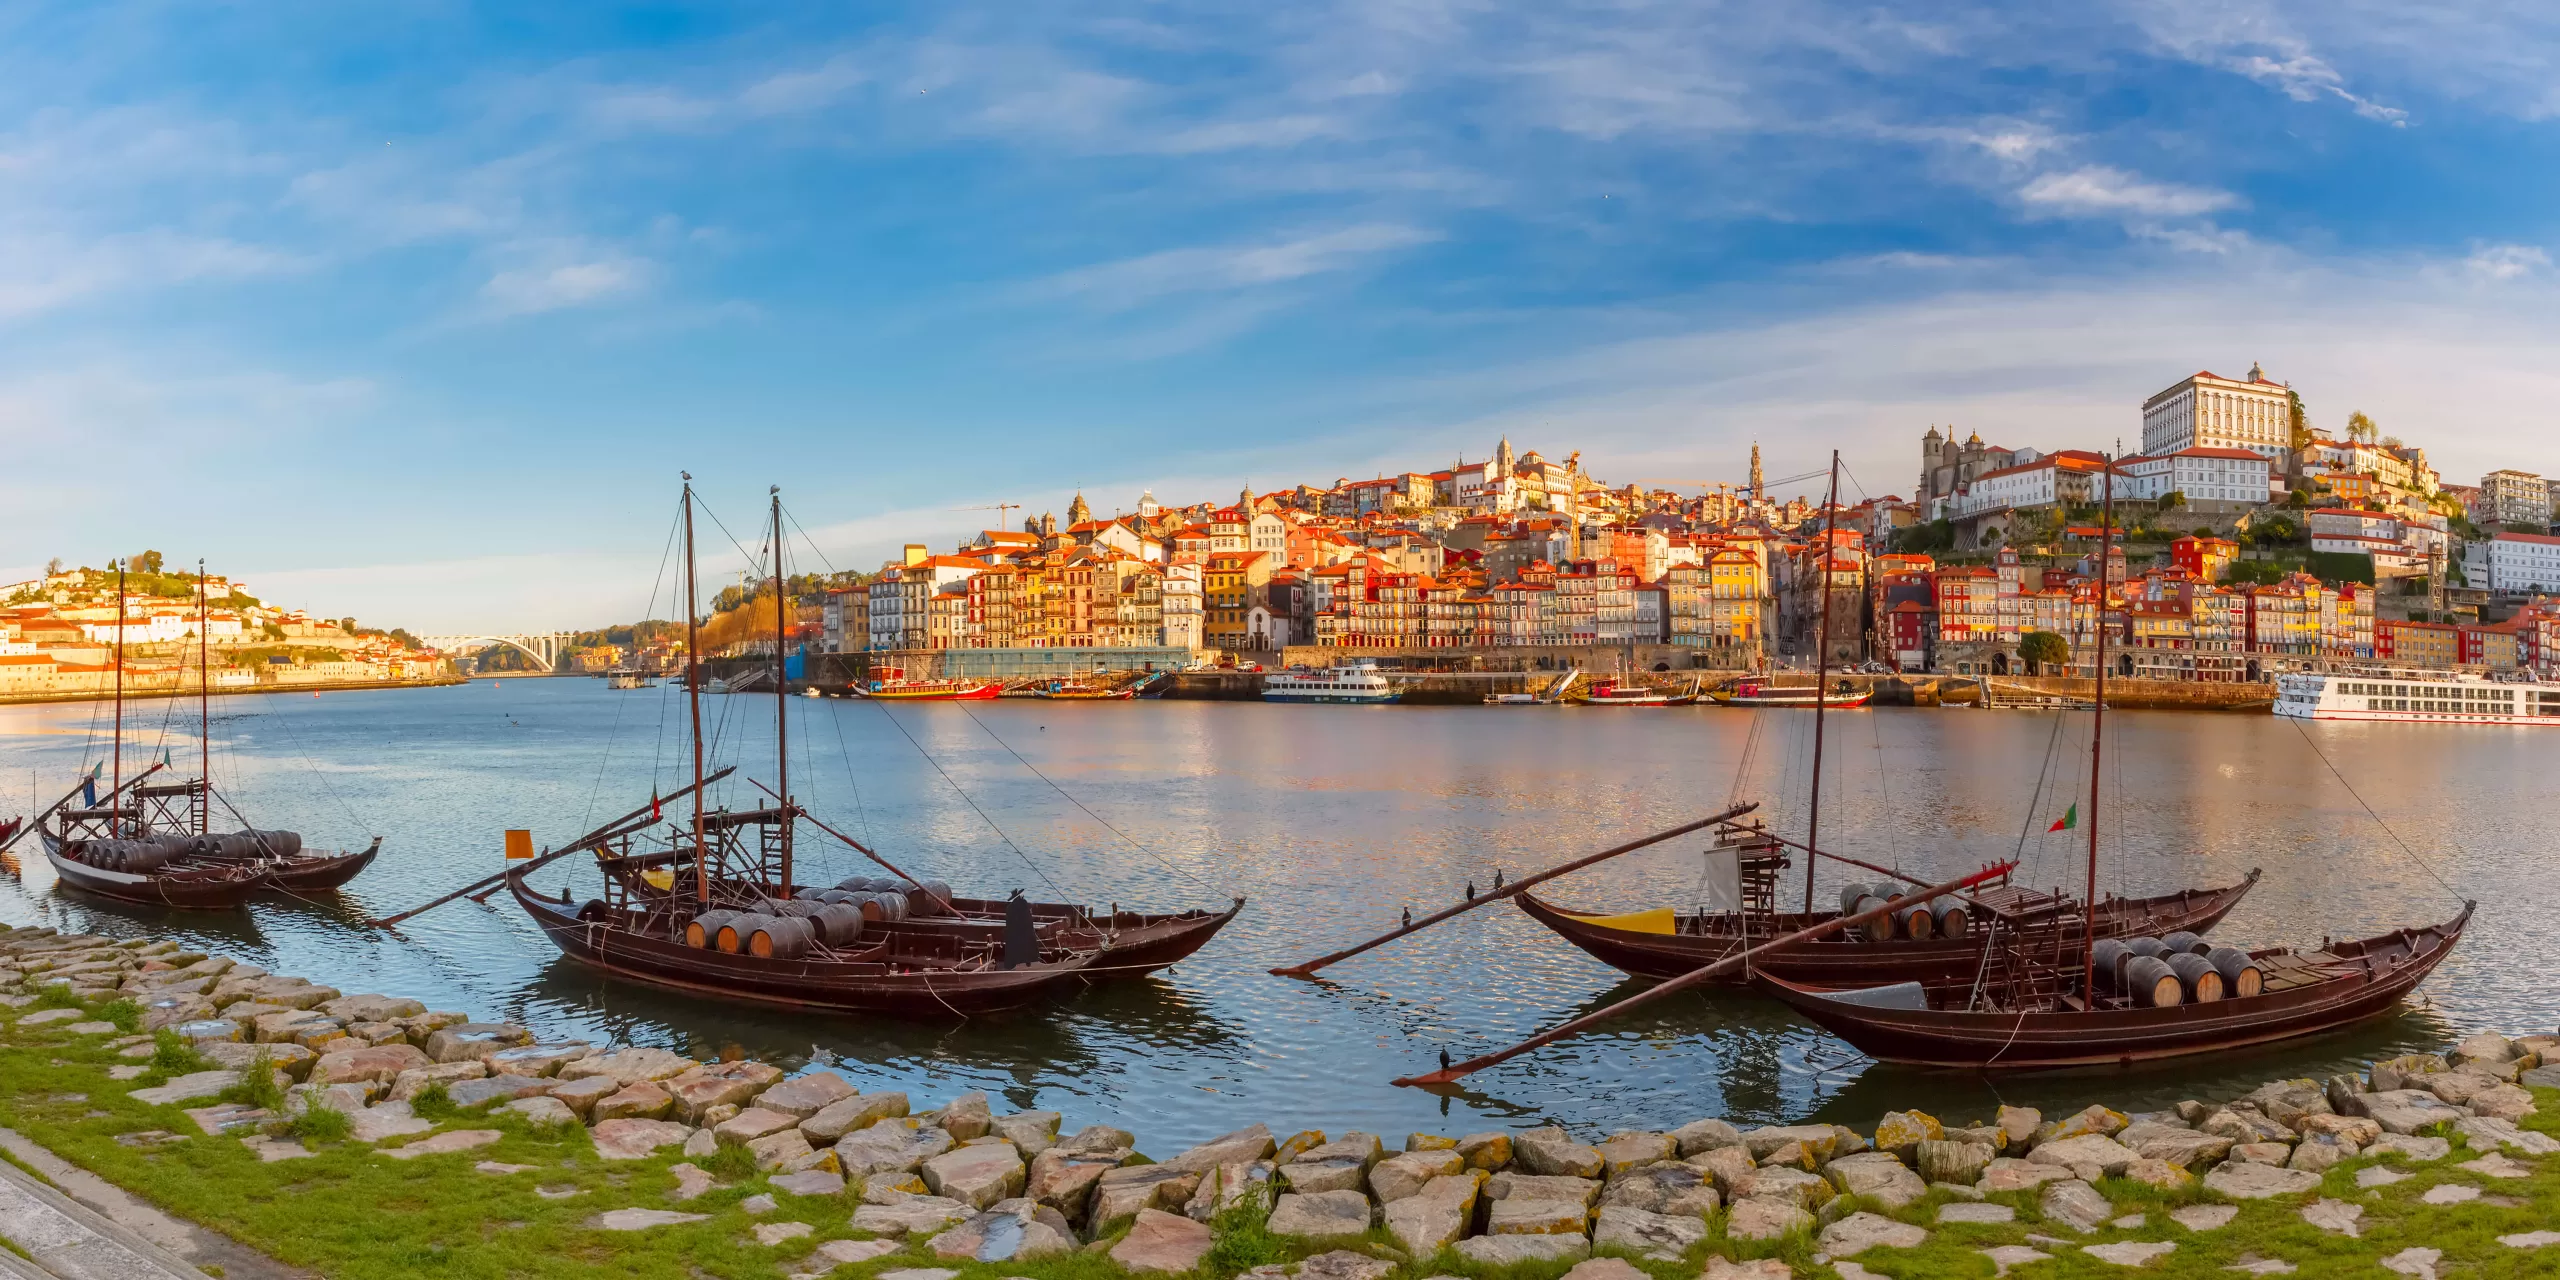 panoramic-view-of-traditional-rabelo-boats-with-barrels-of-port-wine-on-the-douro-river-ribeira-on-the-background-porto-portugal